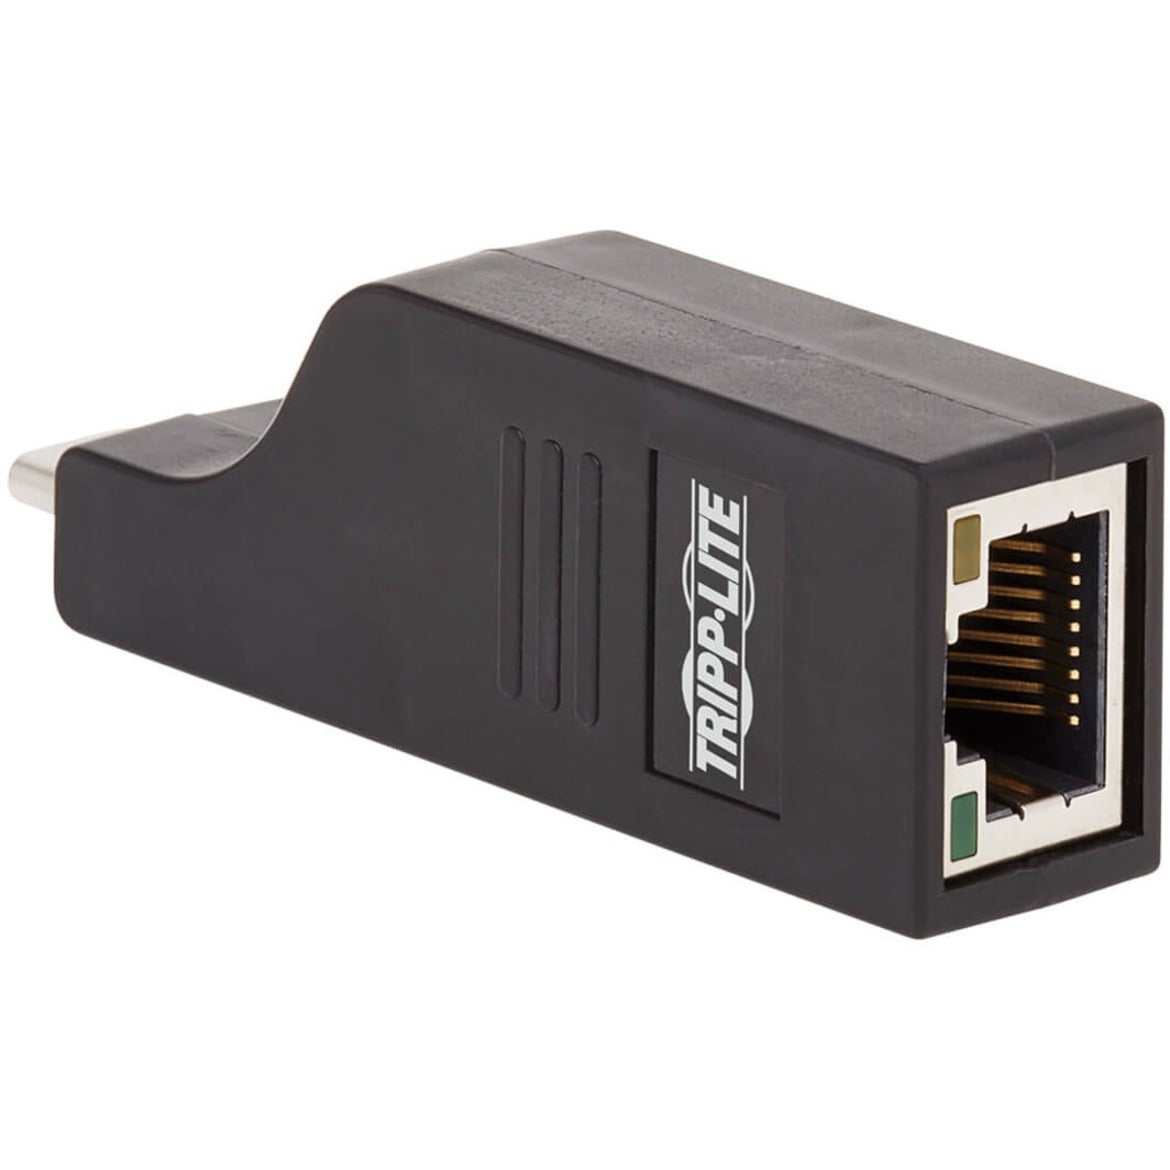 Tripp Lite U436-000-GB USB-C to Gigabit Ethernet Adapter, High-Speed Internet Connection for Computers, Notebooks, and Tablets